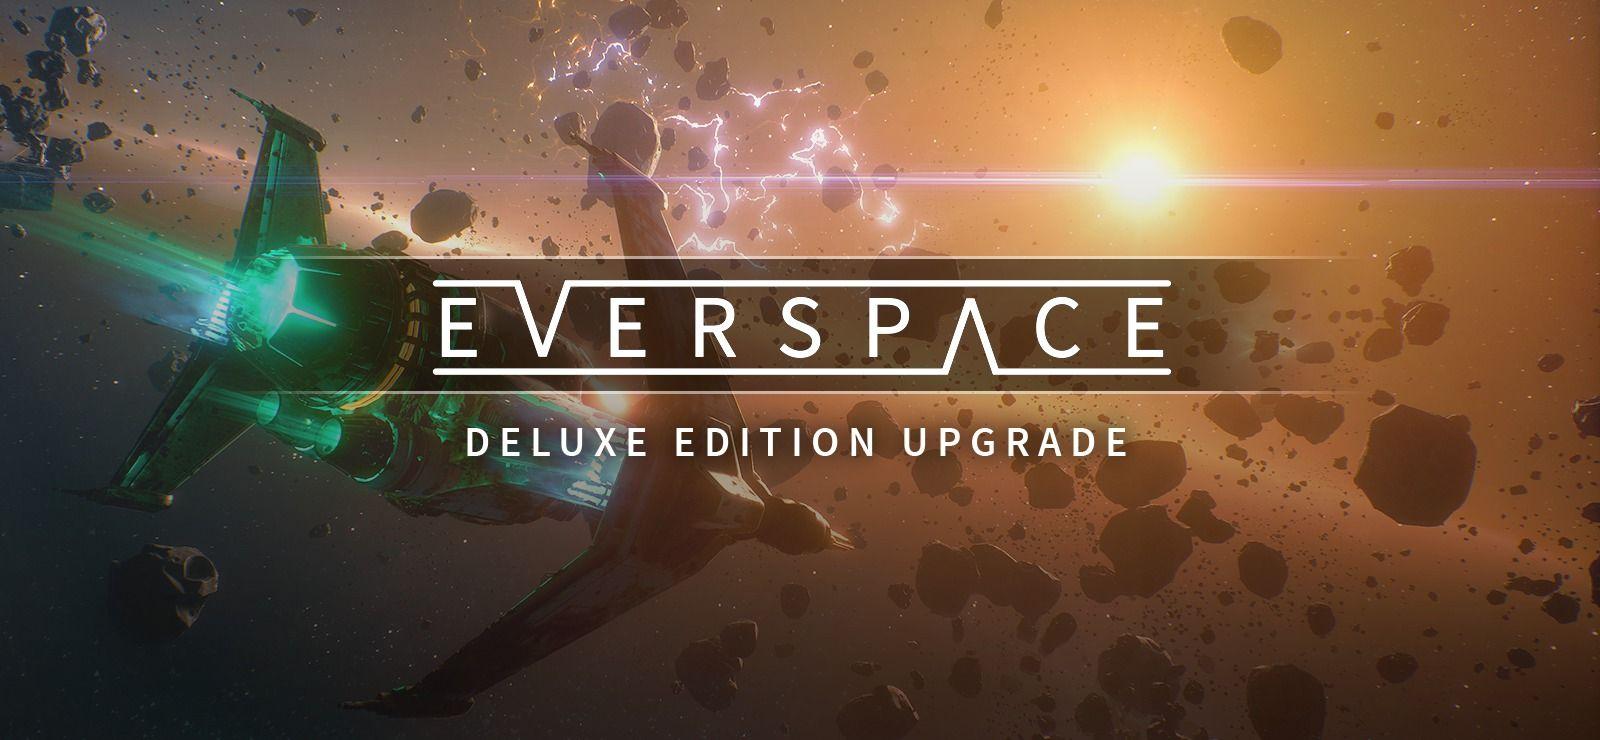 EVERSPACE™ Deluxe Edition Upgrade on GOG.com